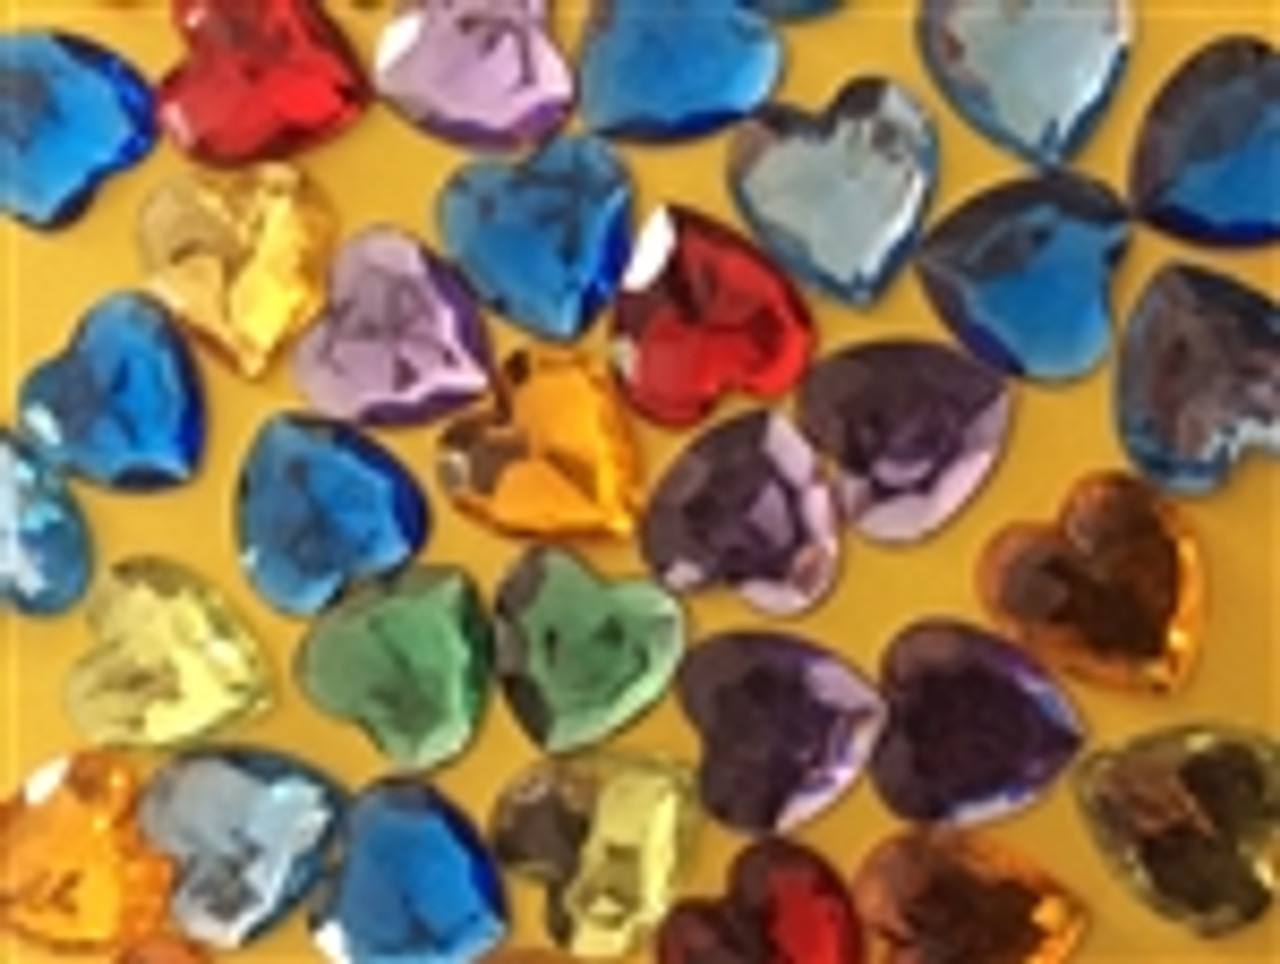 Mixed 1/2 Heart Gems 30ct - The Paint and Party Place